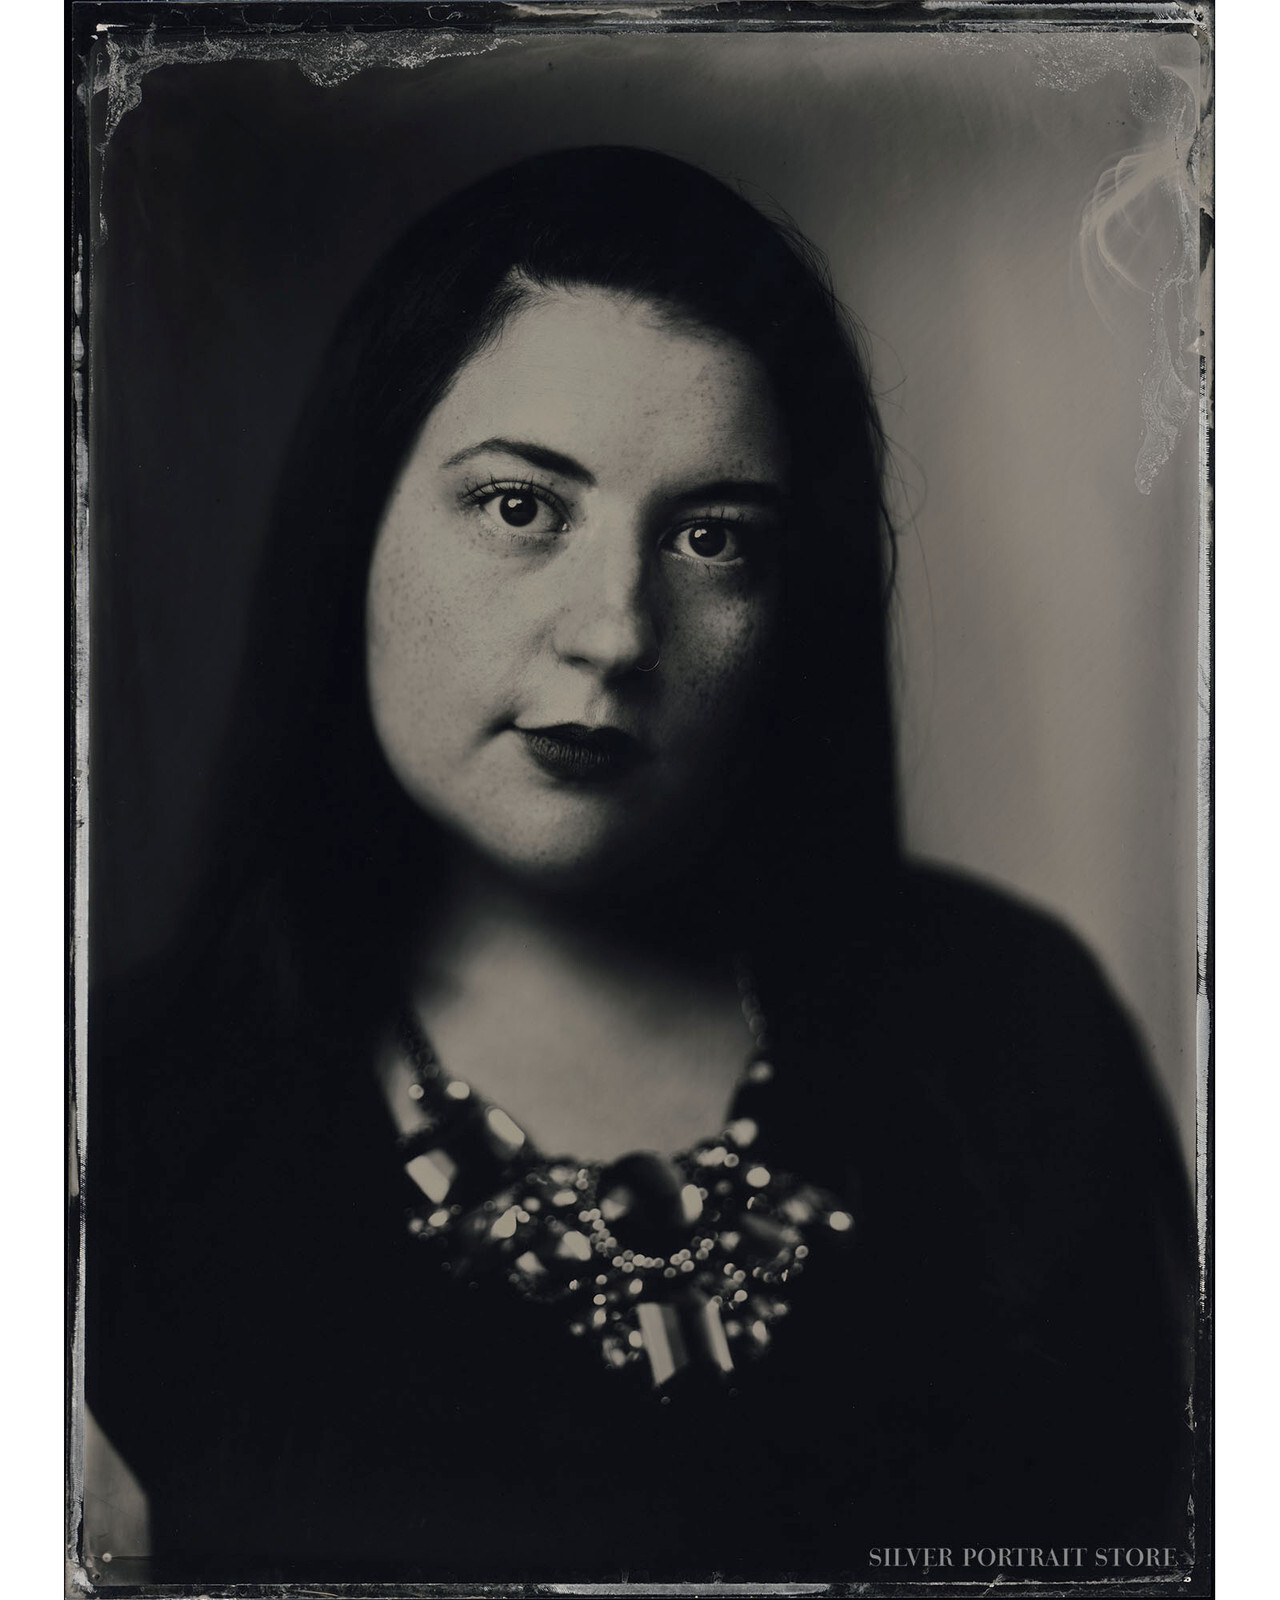 Sarah-Silver Portrait Store-scan from Wet plate collodion-Tintype 13 x 18 cm.